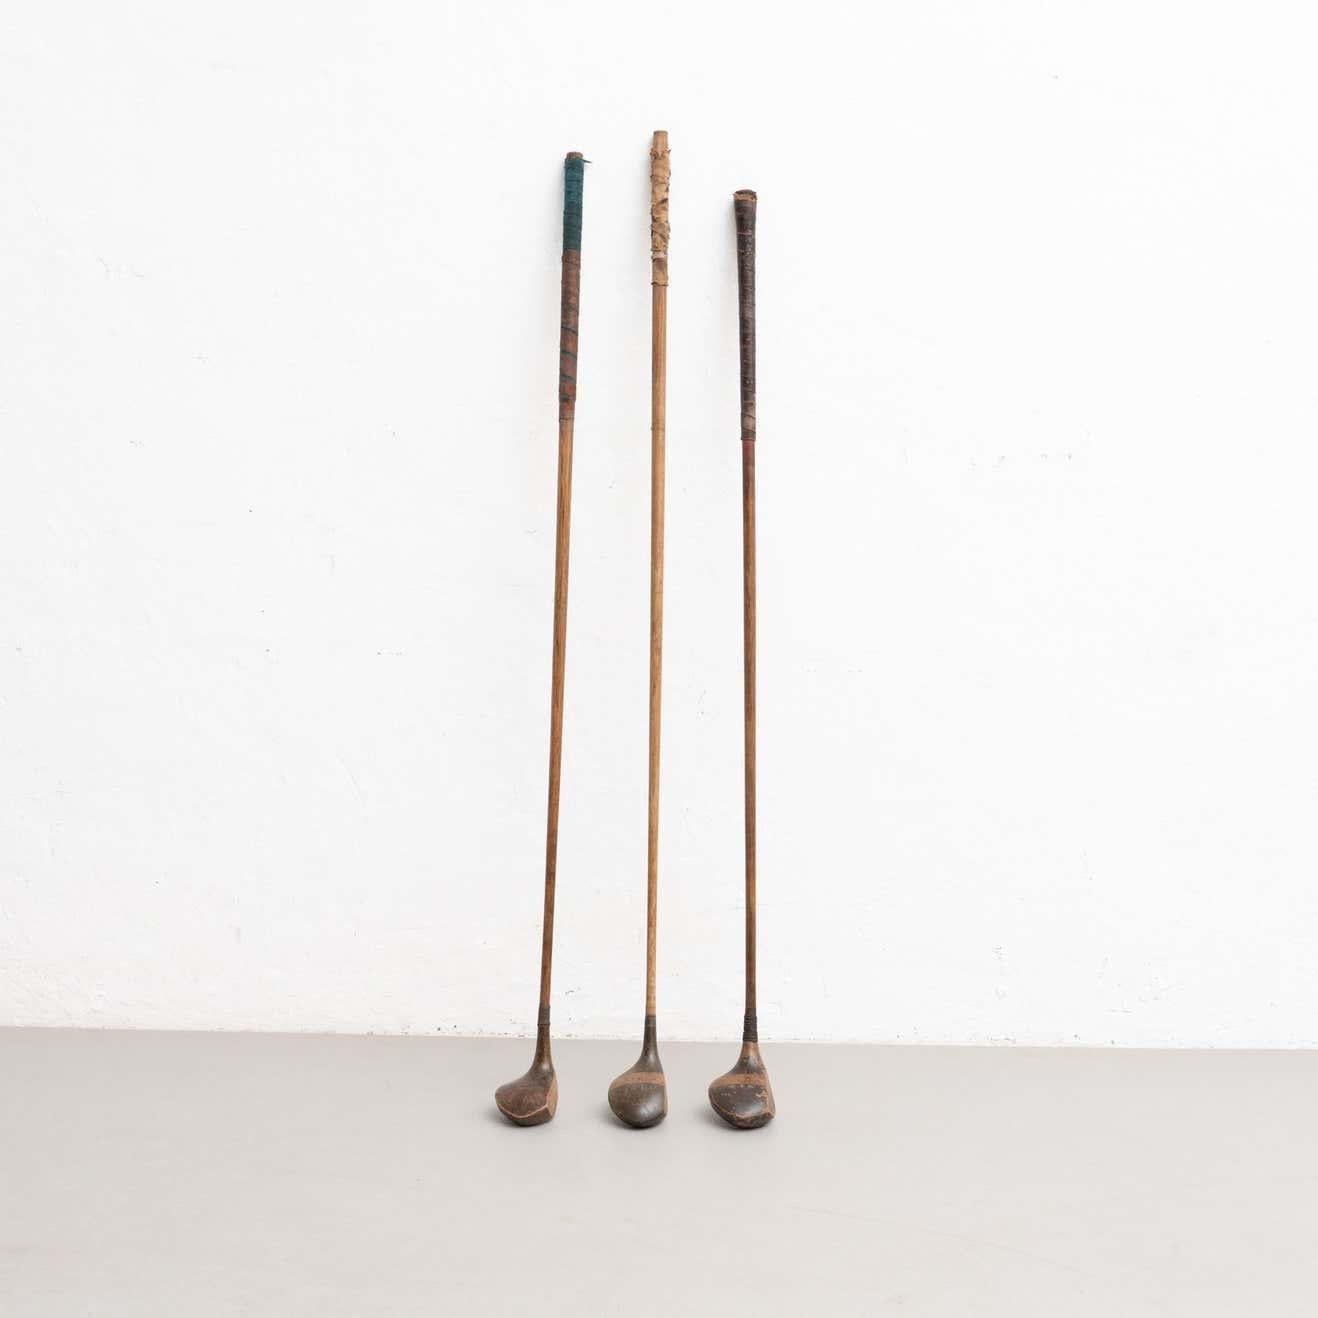 Set of three antique traditional Jack White's sports wooden golf clubs. 

Made in London, circa 1930.

In original condition, with minor wear consistent with age and use, preserving a beautiful patina.

Material:
Wood.
Metal.